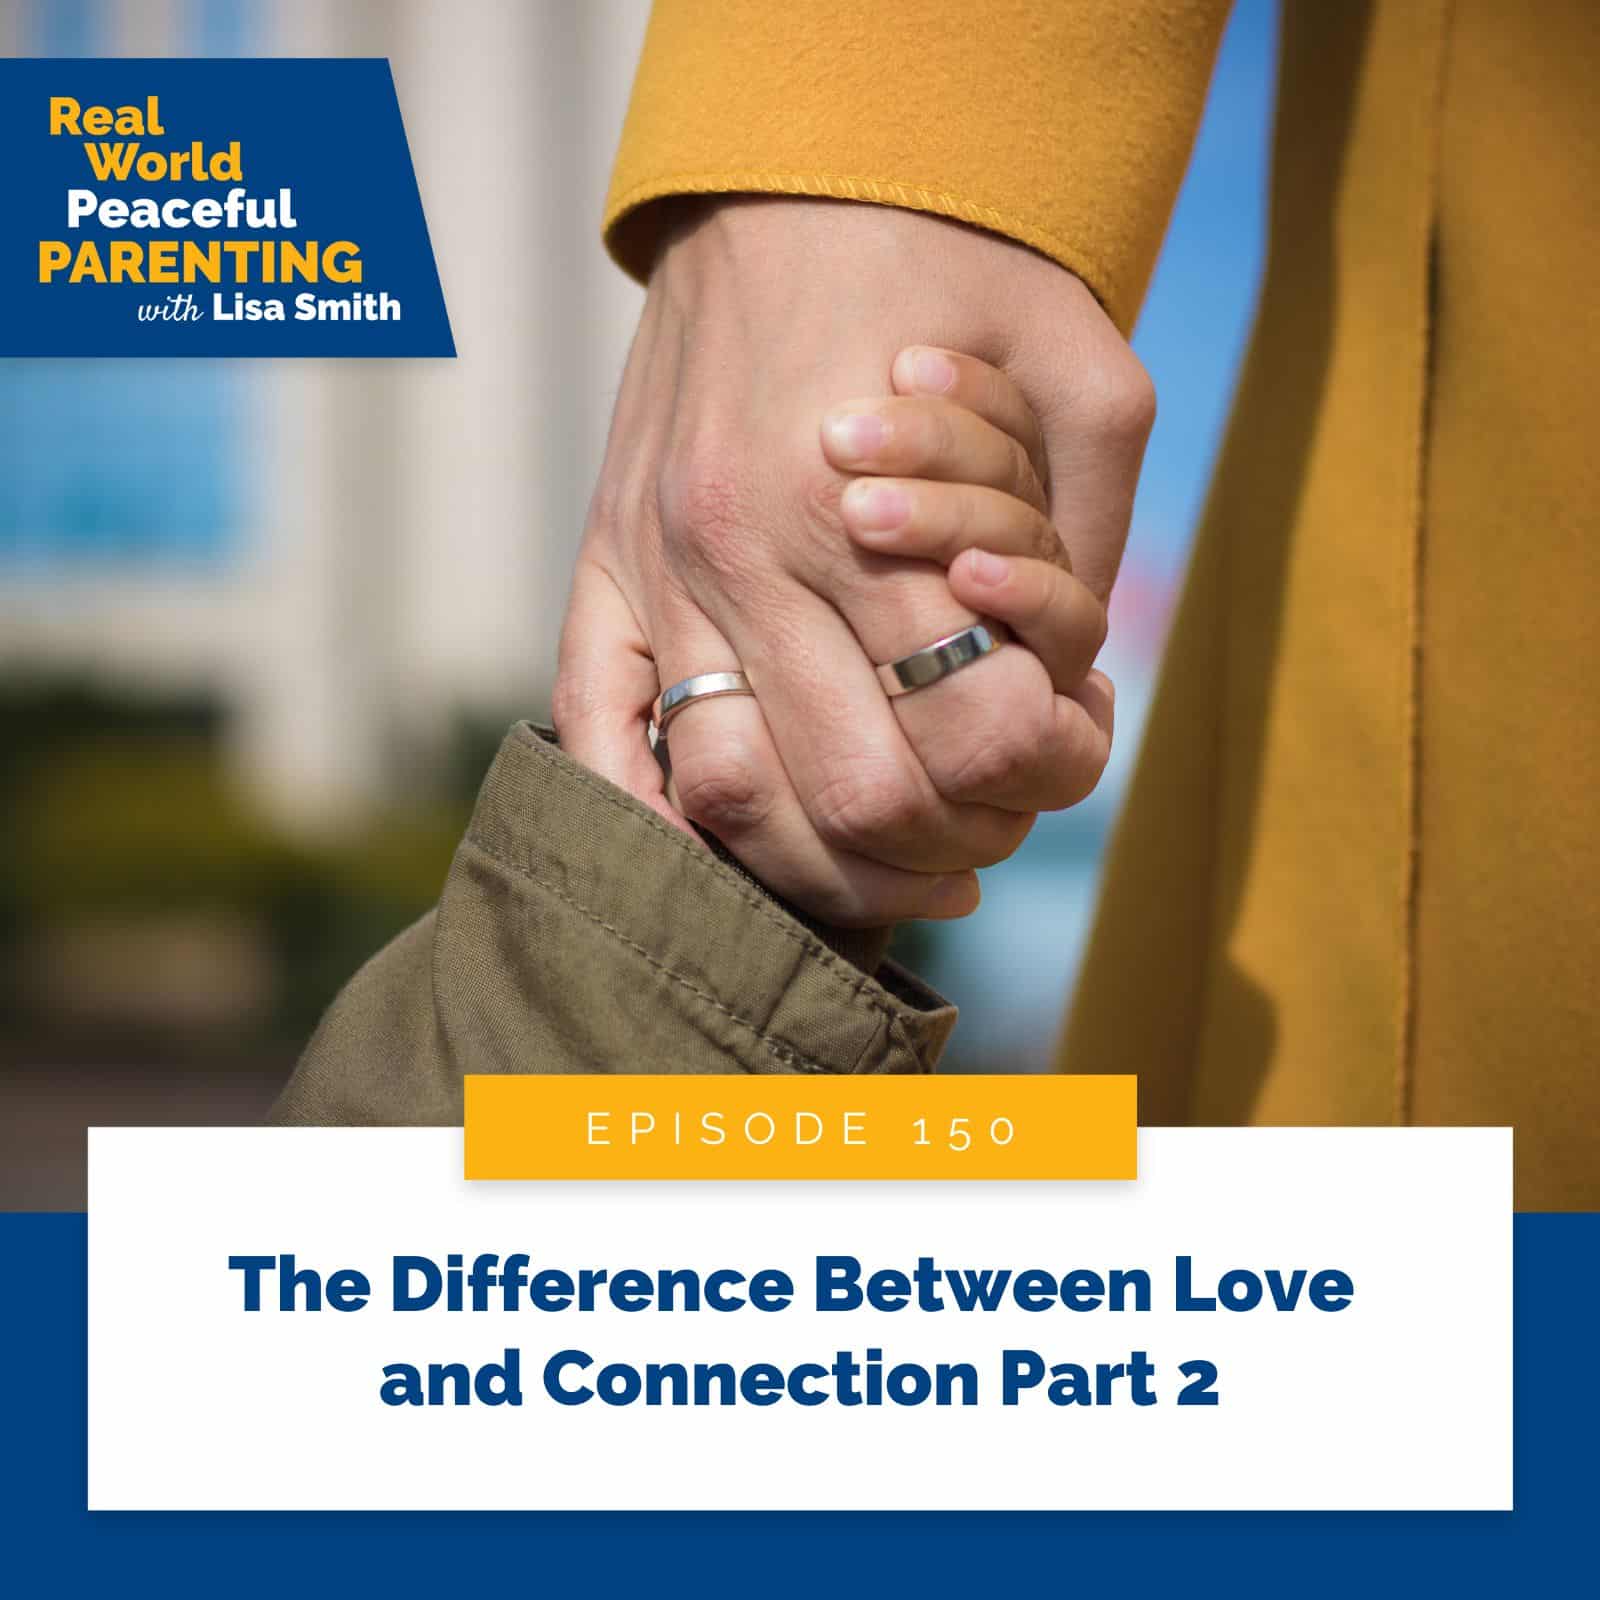 Real World Peaceful Parenting with Lisa Smith | The Difference Between Love and Connection Part 2